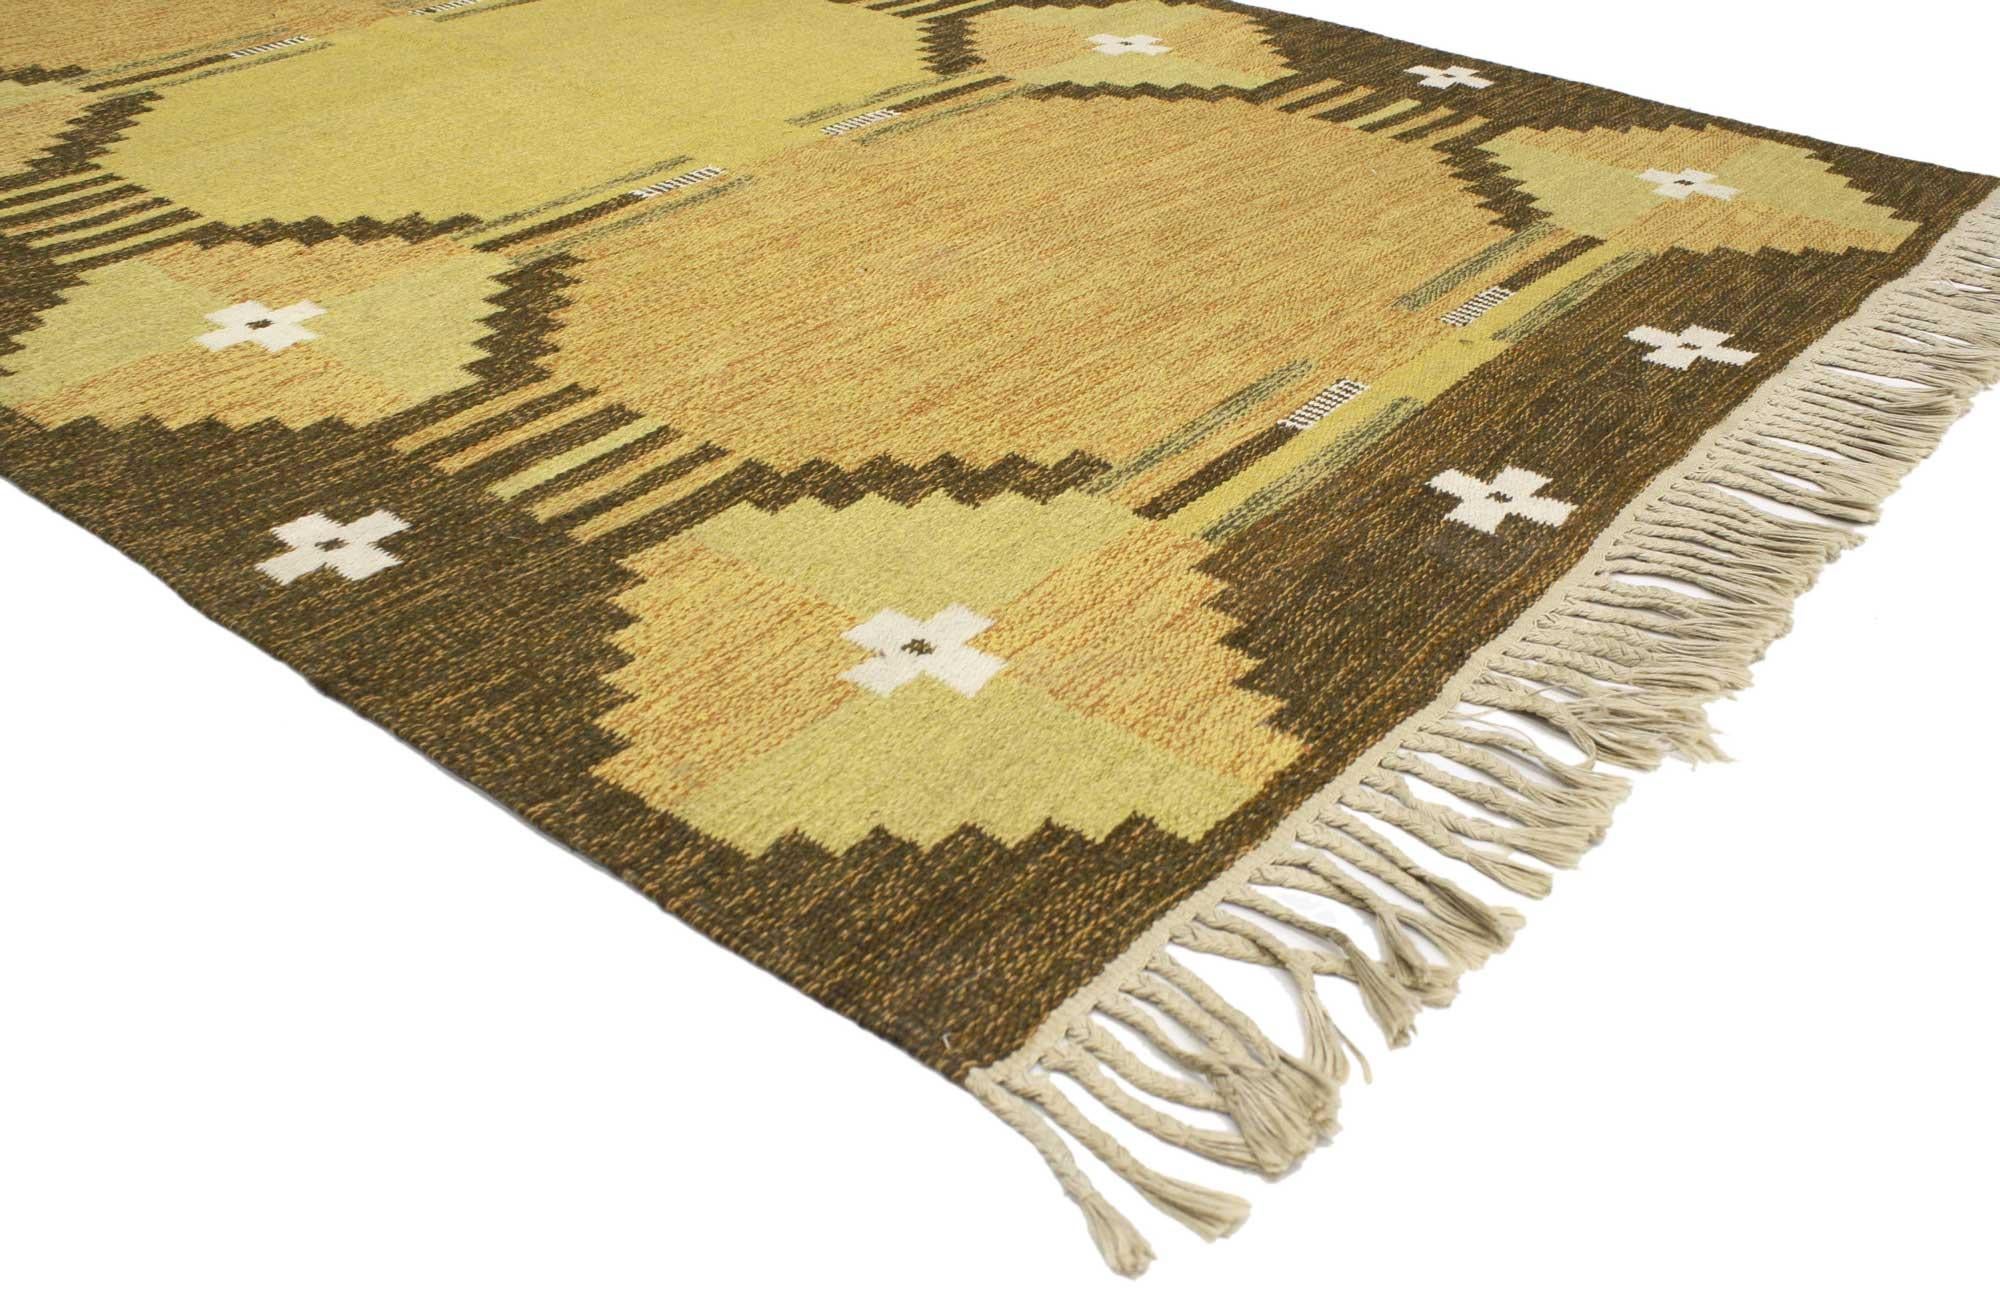 77034 Vintage Swedish Kilim Rollakan Rug by Ingegerd Silow, 05'01 x 08'02.
With its Scandinavian Modern style, incredible detail and texture, this handwoven wool vintage Swedish rollakan rug is a captivating vision of woven beauty. The geometric